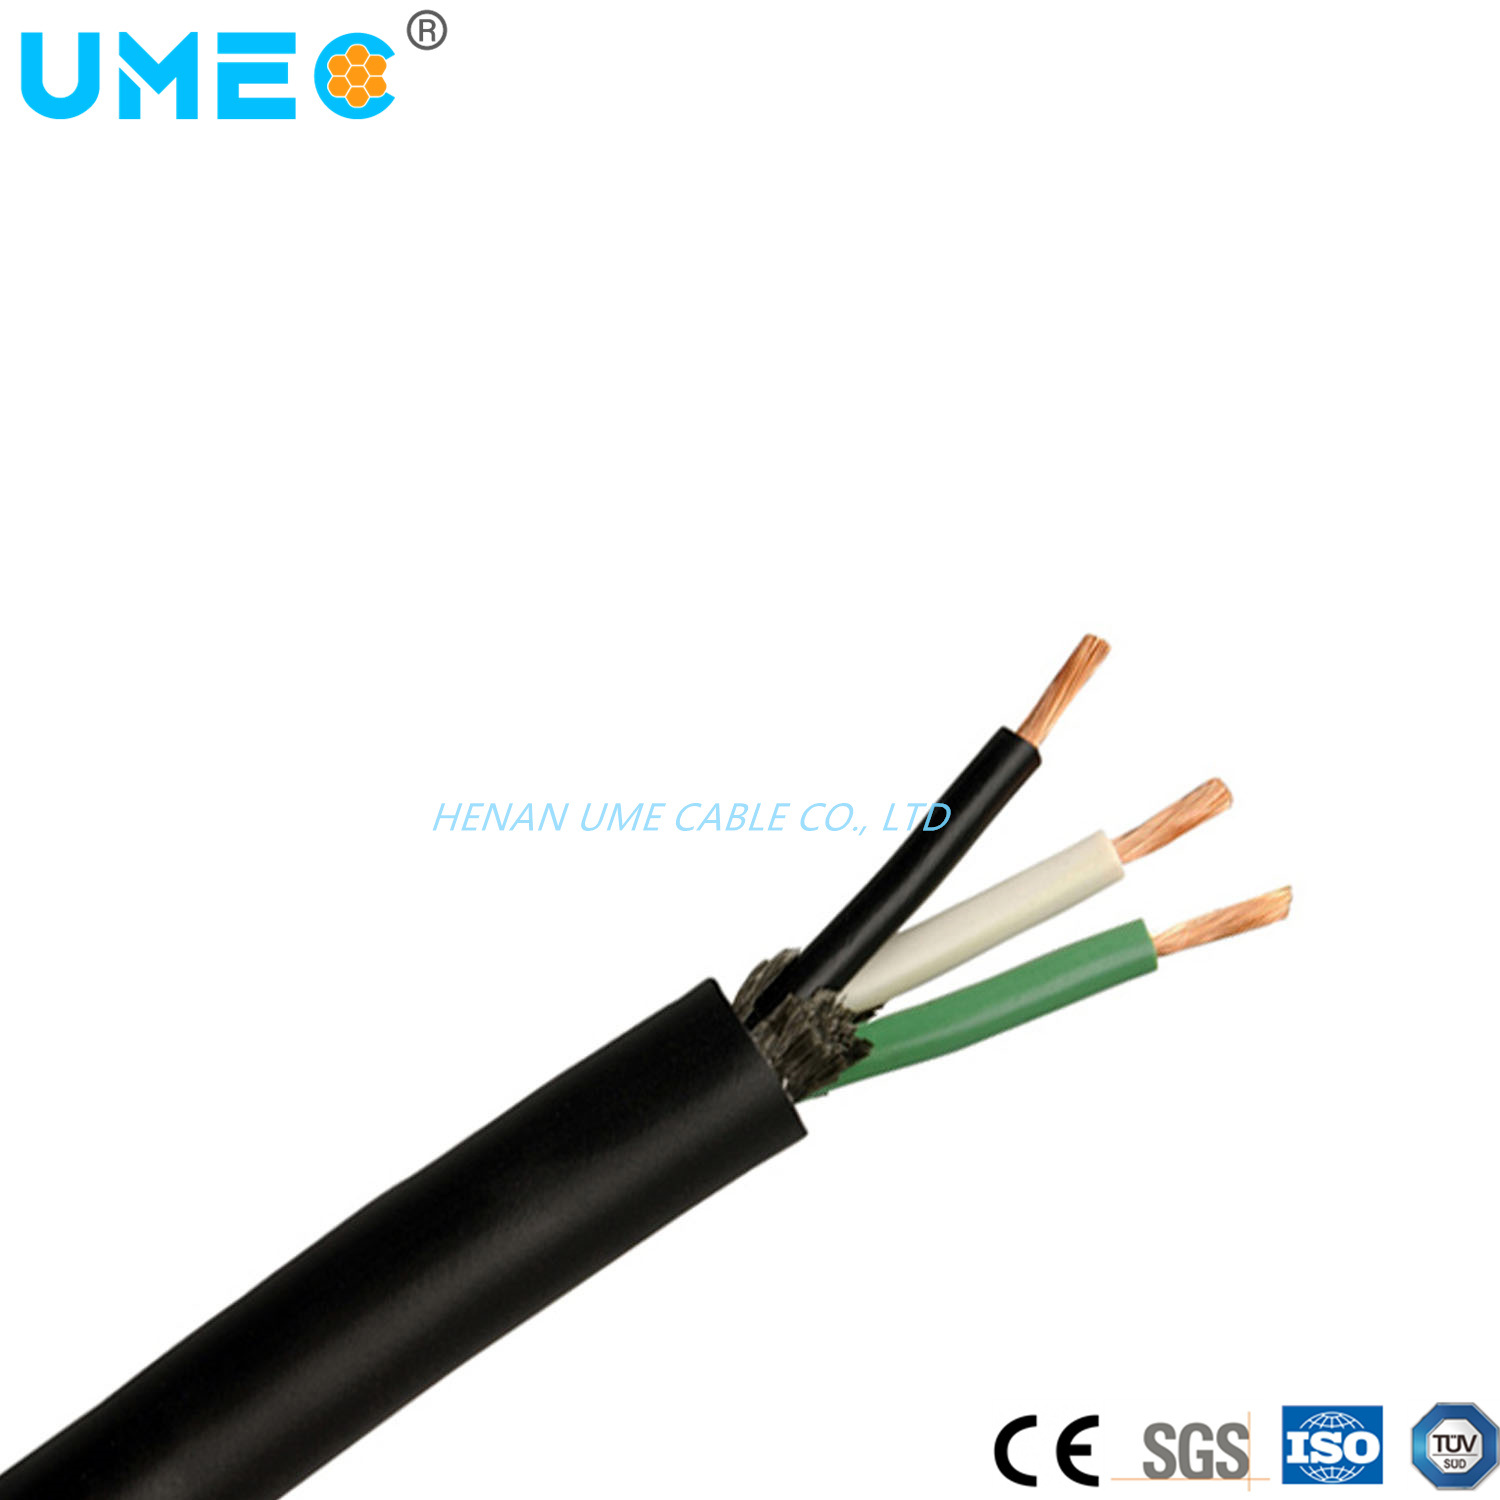 300/500V 450/750V Electric Harmonized Standard Industrial Cables H05bb-F /H07bb-F 2X2.5 3X1.5 4X0.75mm2 Rubber Cable Wire